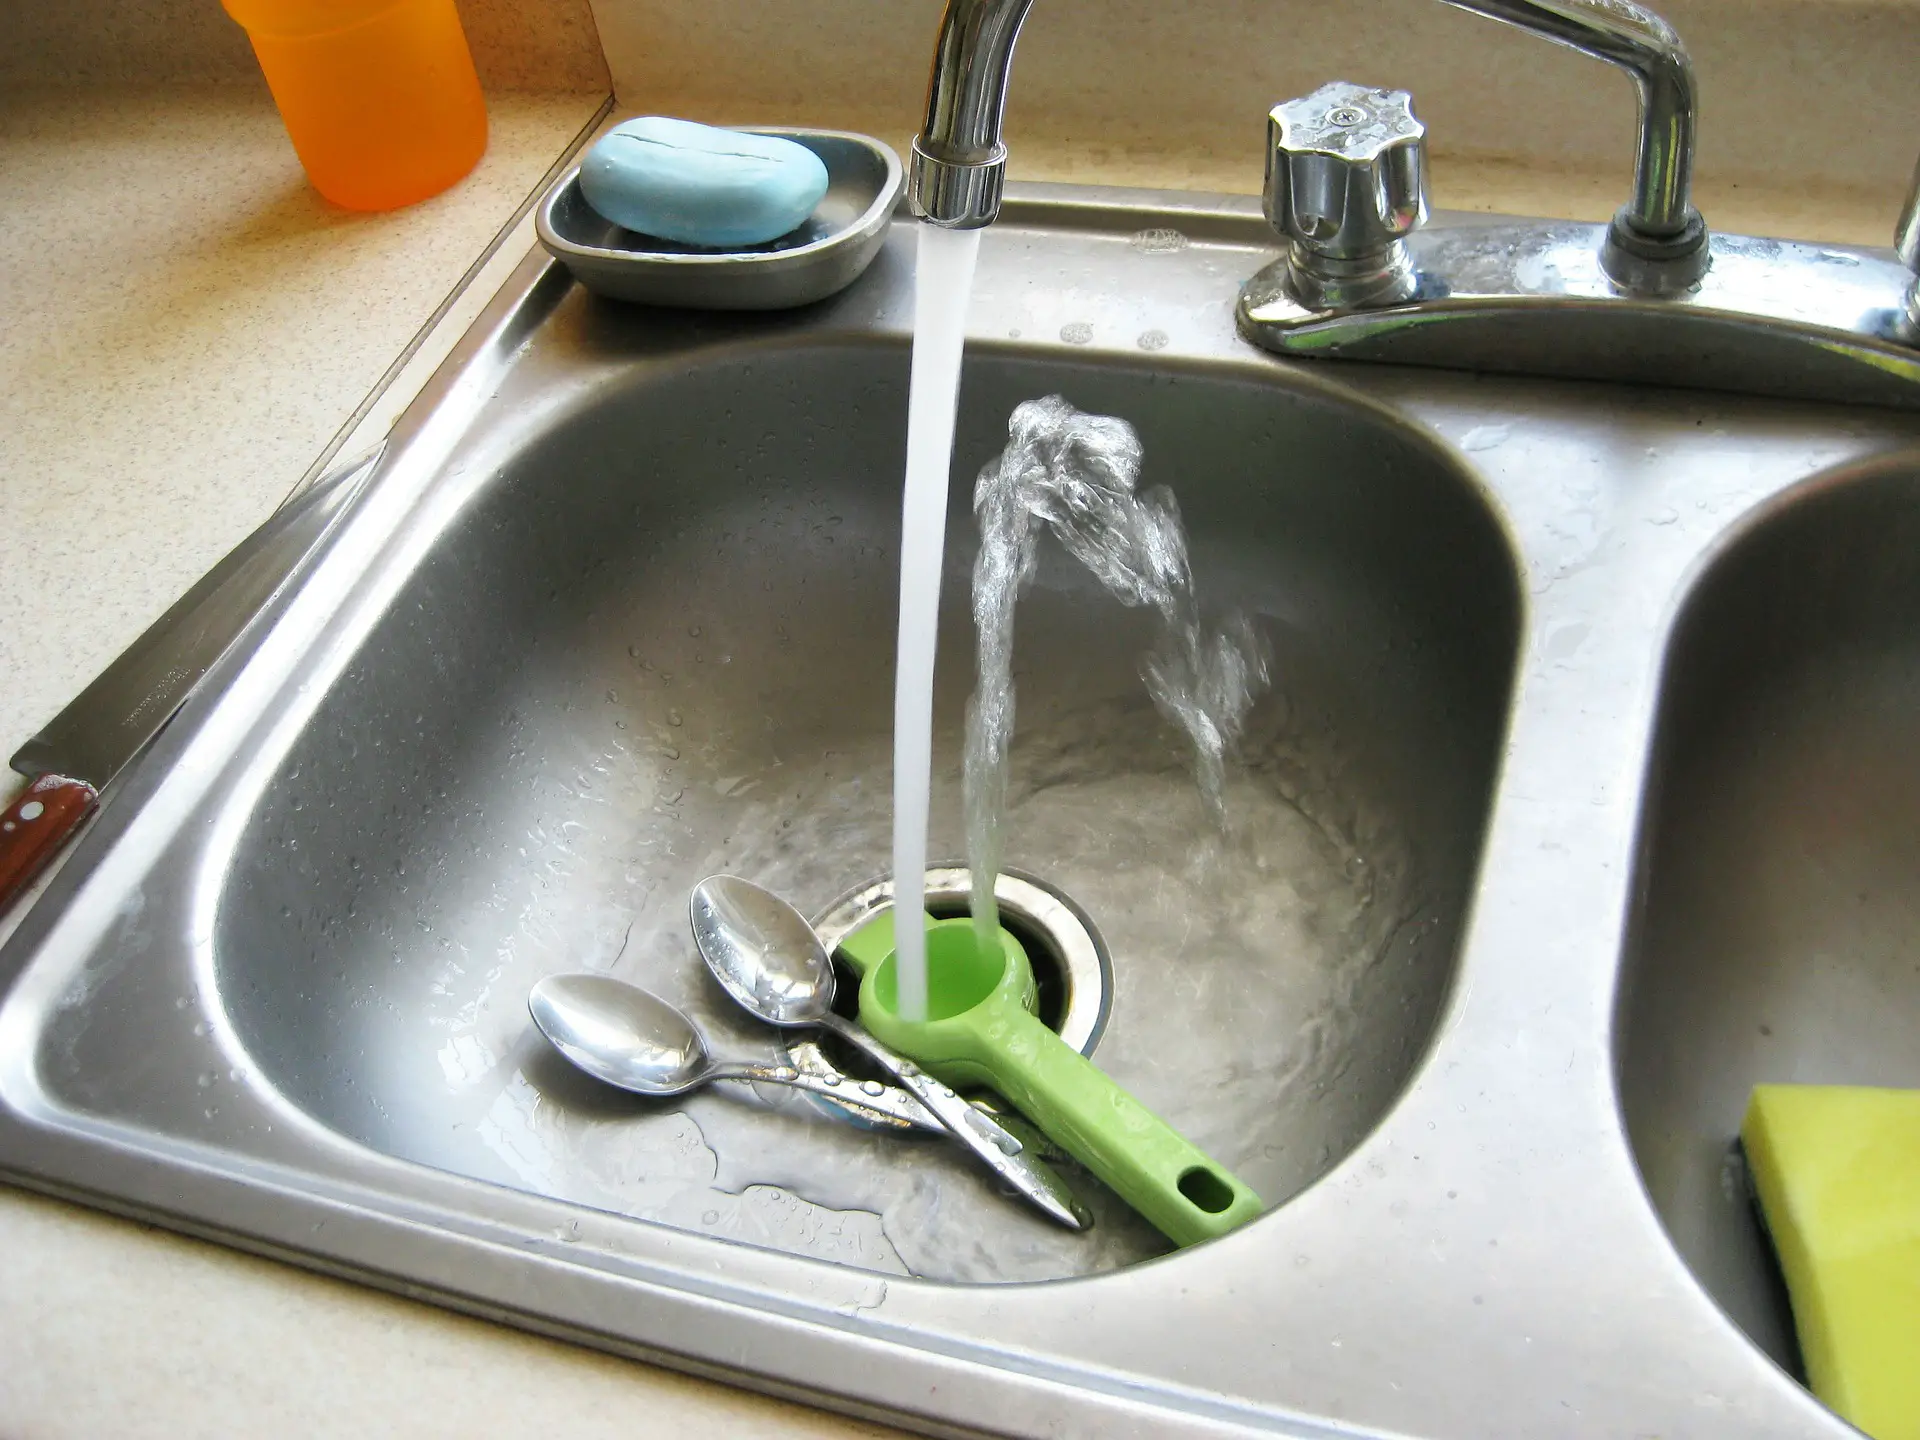 How do you fix a faucet that won't give hot water